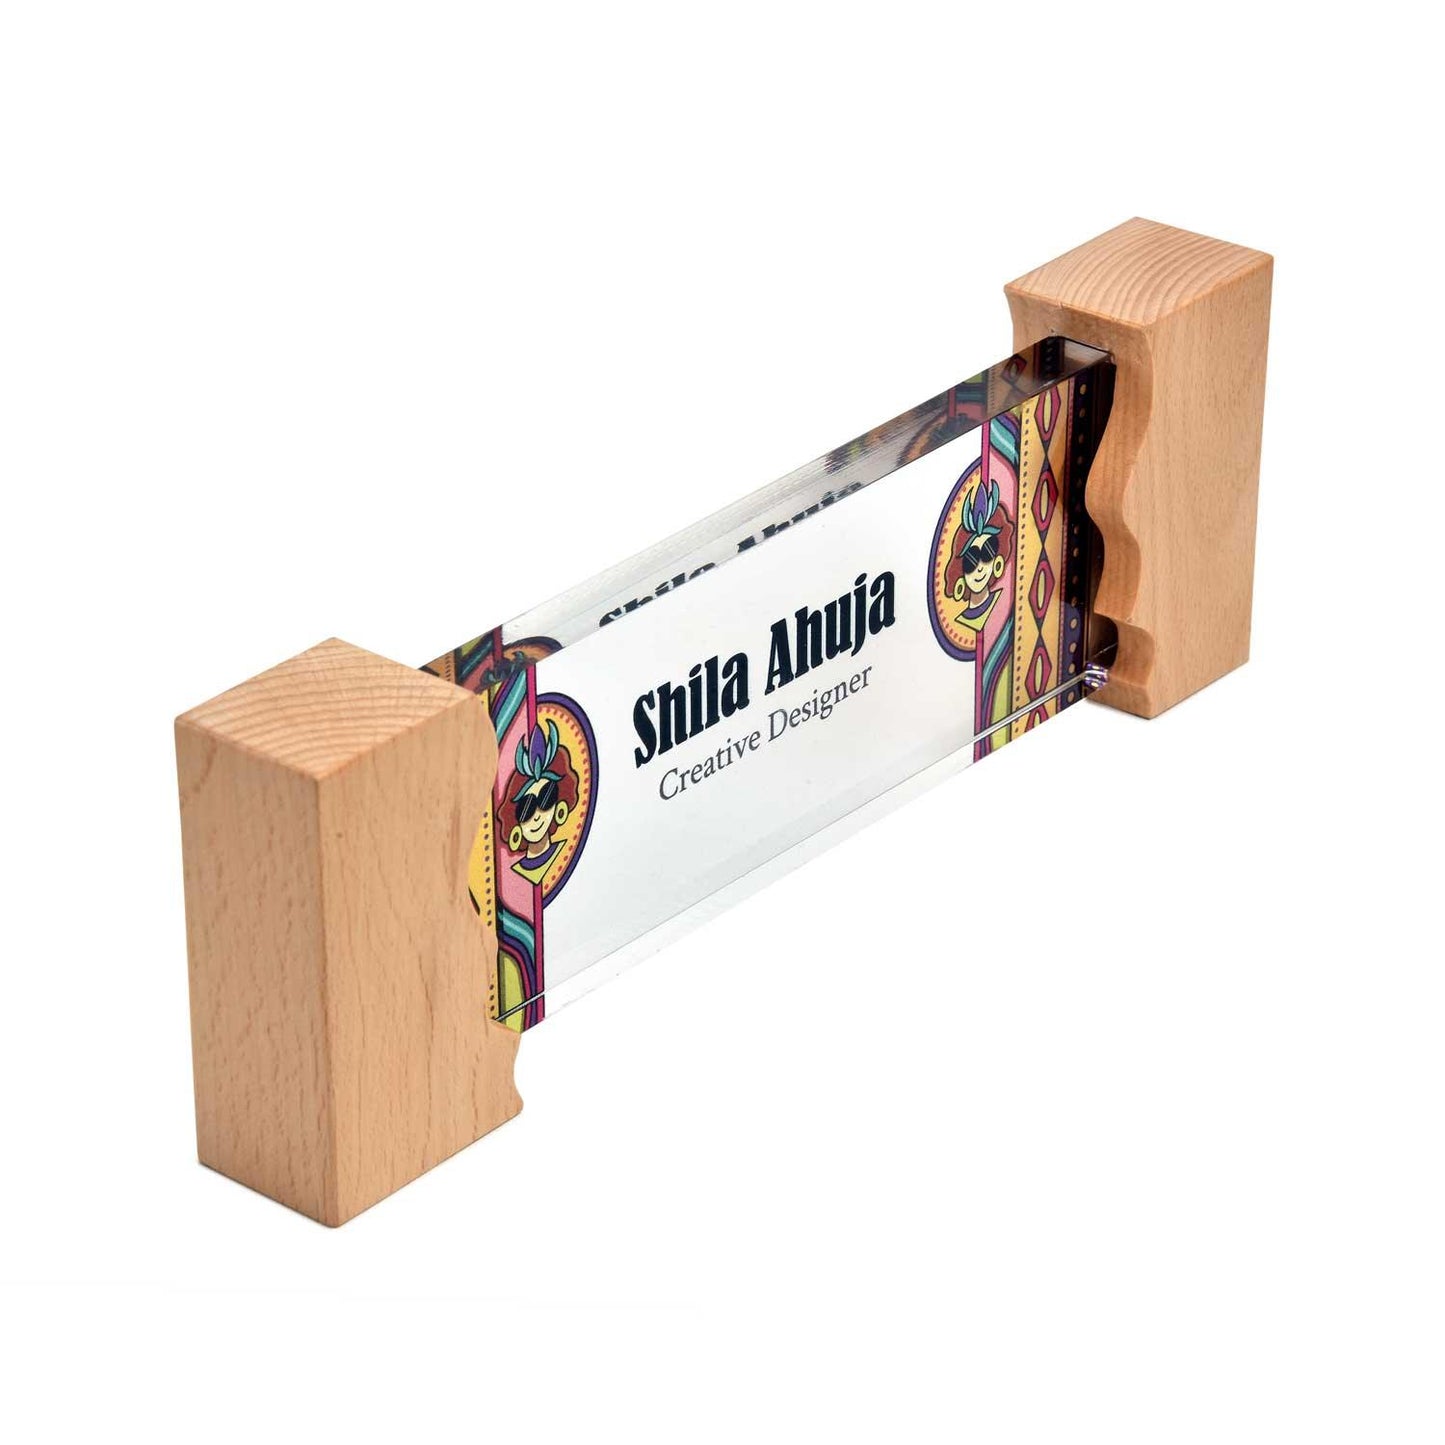 Hippie at Work Desk Name Plate with Wooden Stand - Housenama